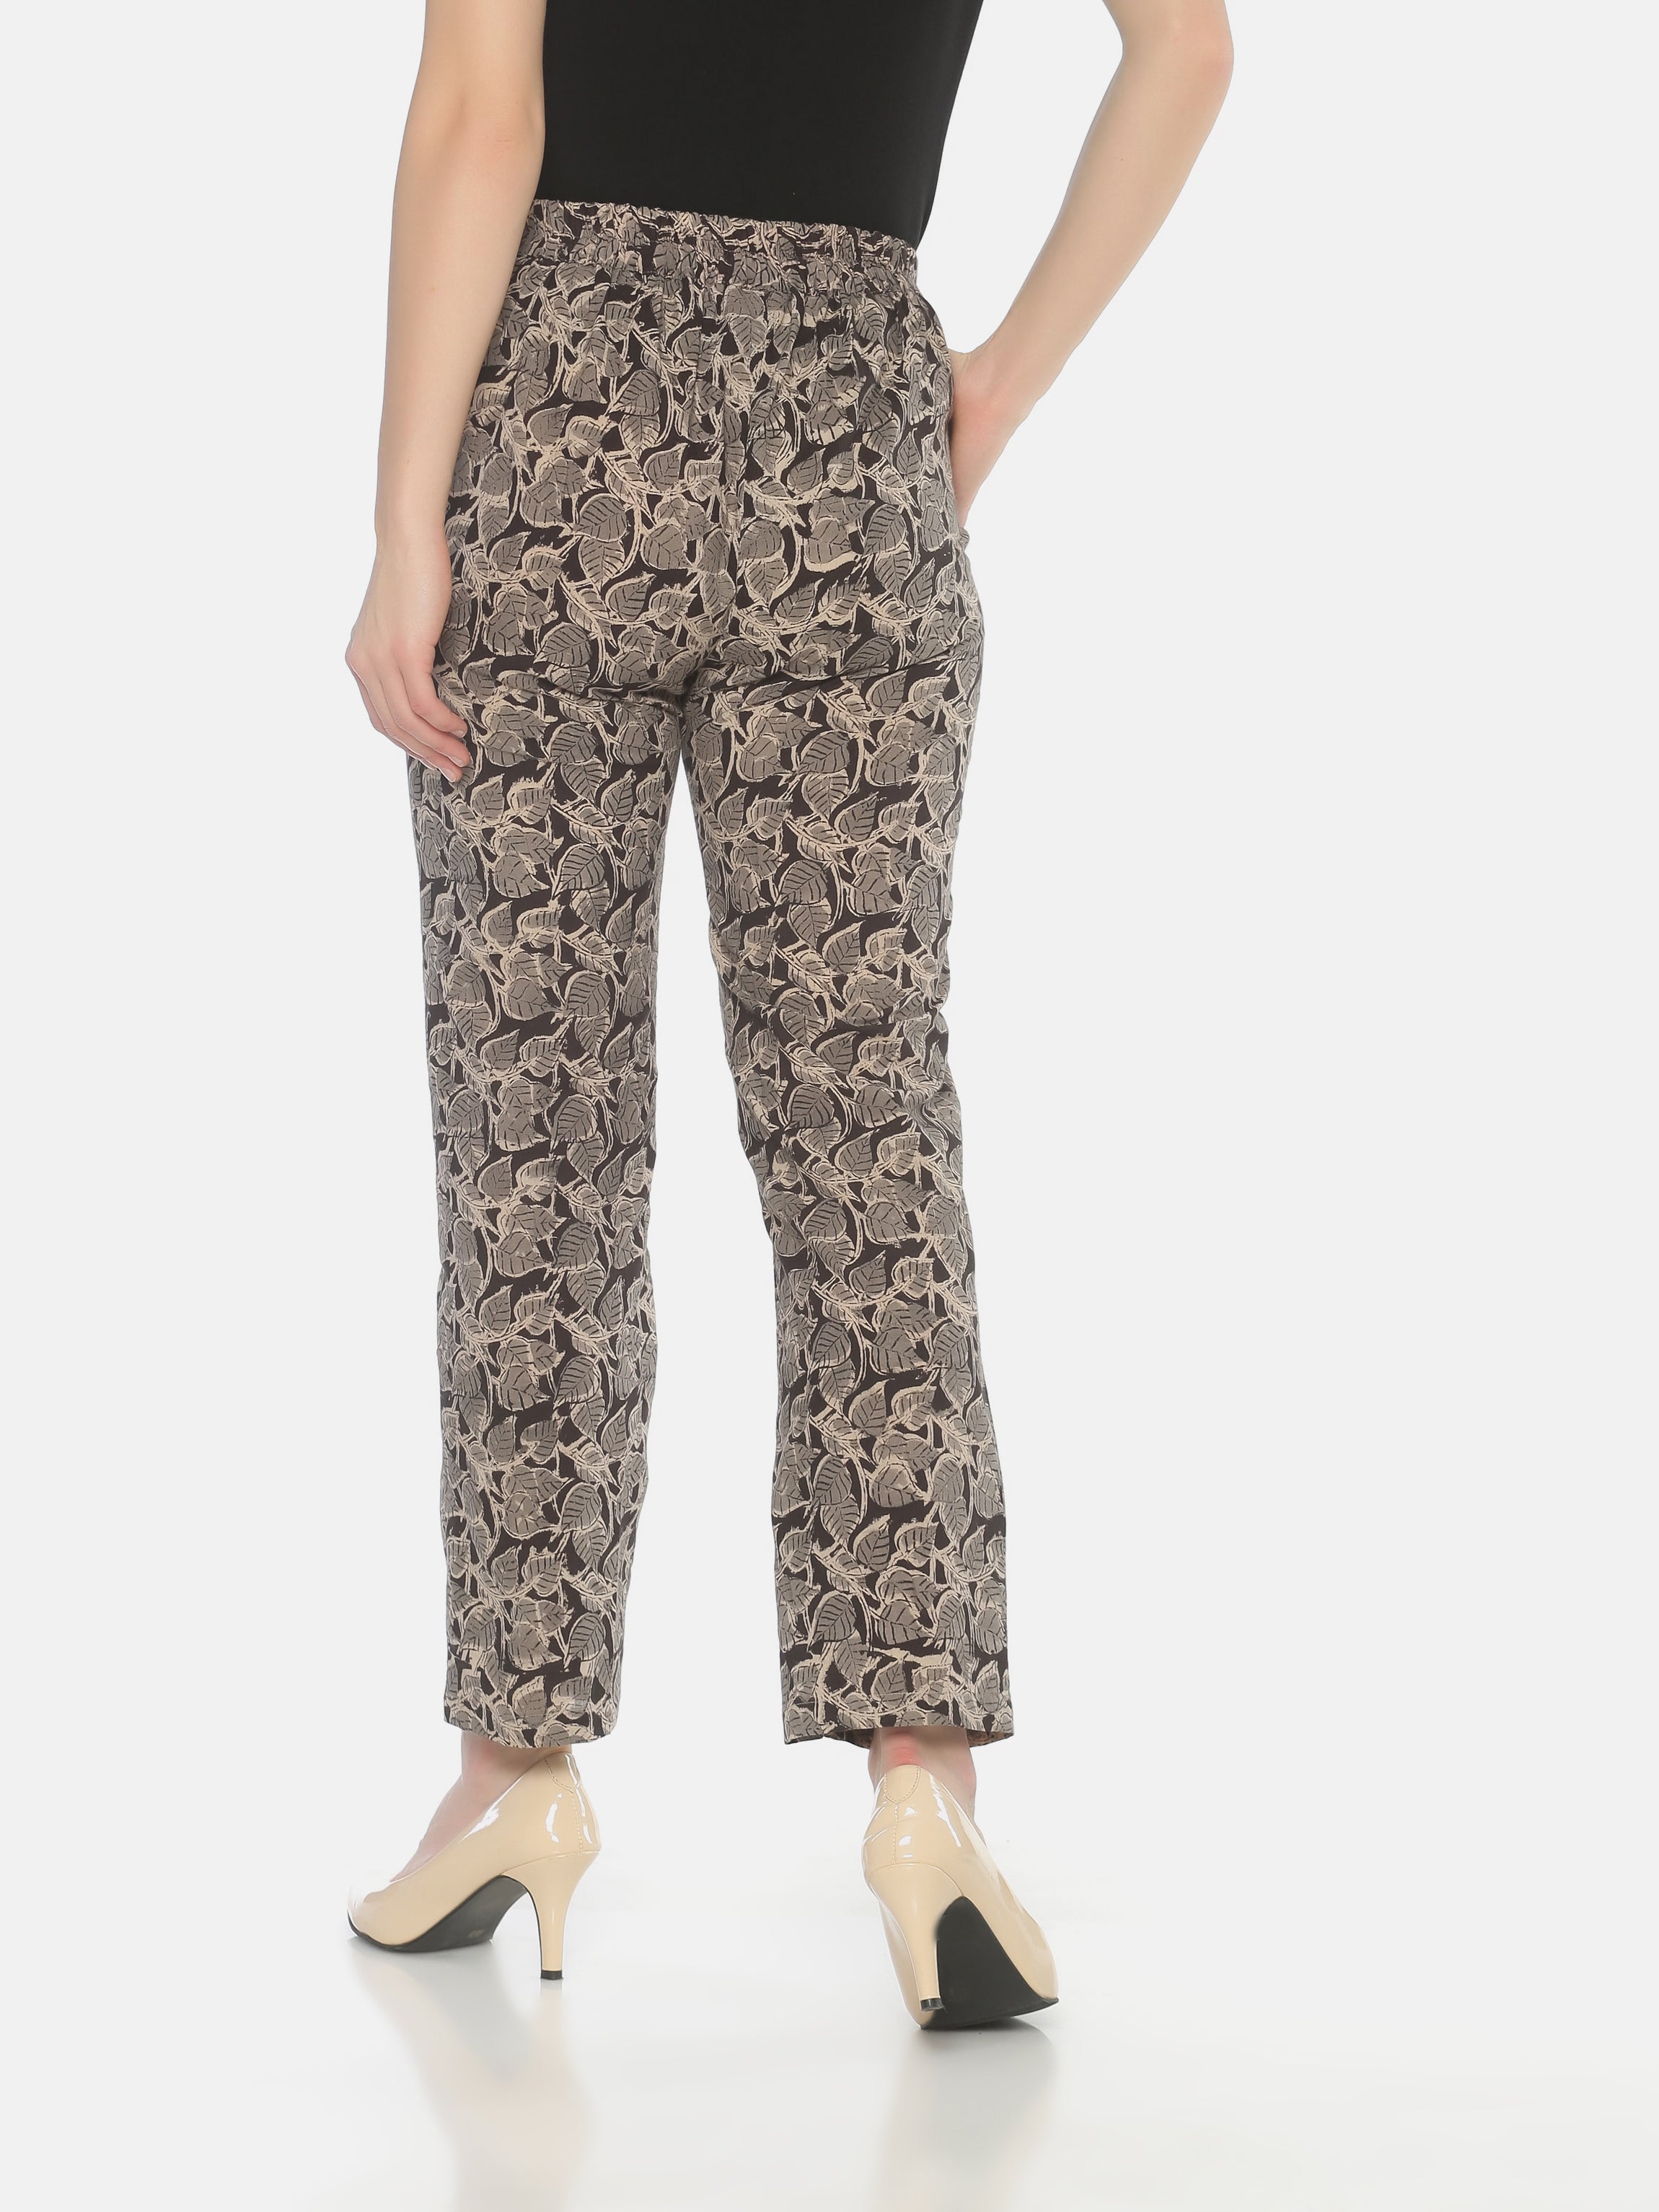 Buy Trousers For Women & Modern Palazzo Pants Online